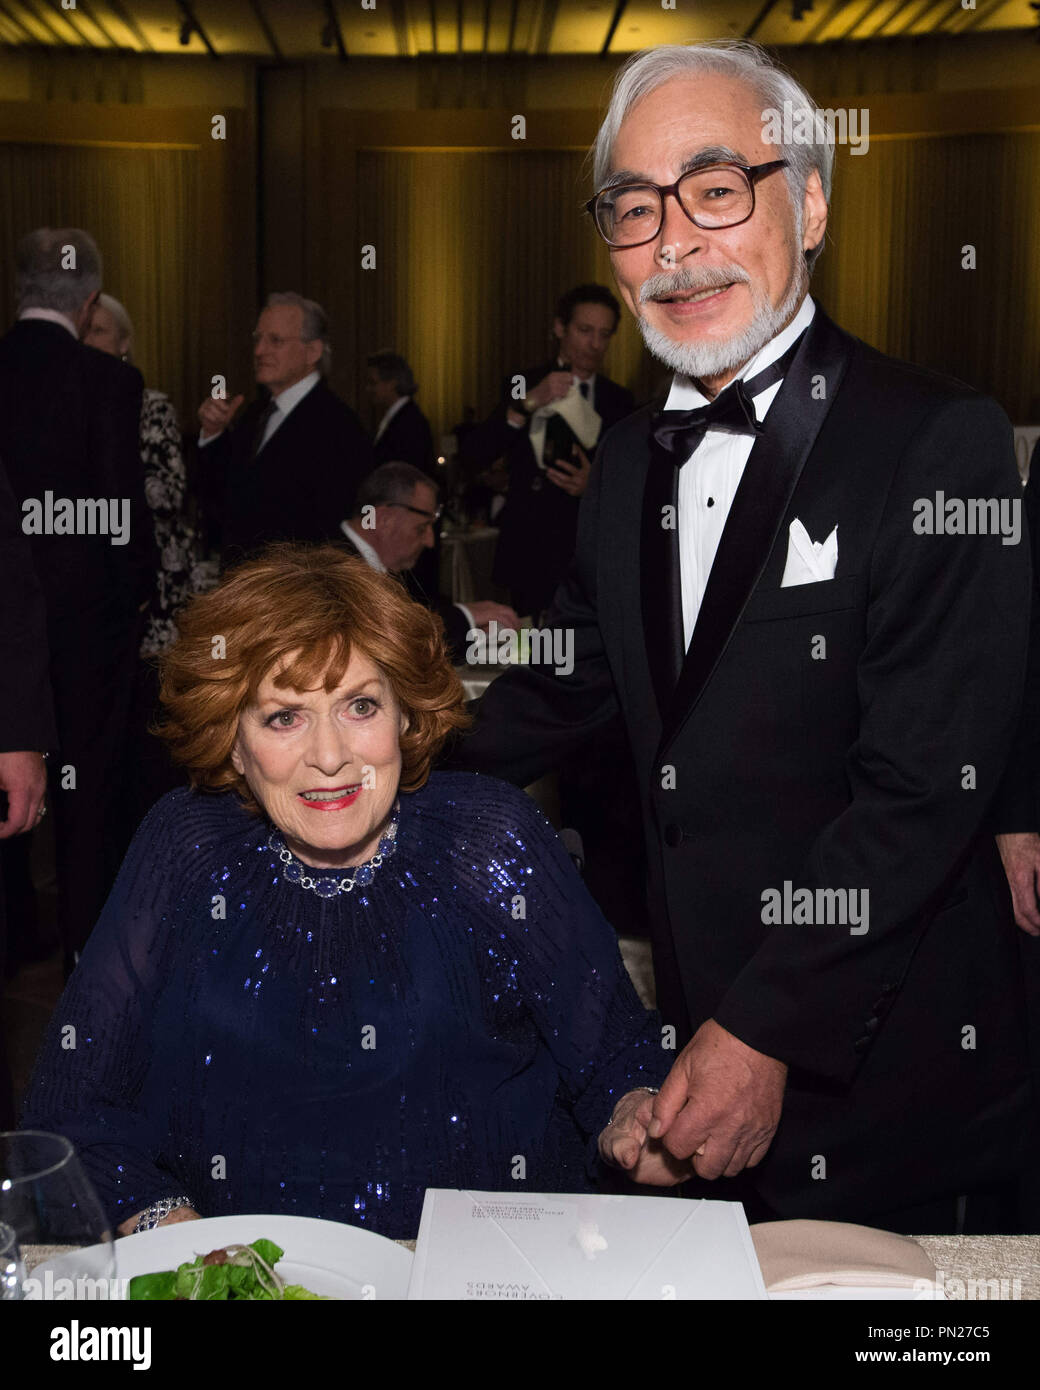 Honorary Award recipients Maureen O’Hara (left) and Hayao Miyazaki attend the 6th Annual Governors Awards in The Ray Dolby Ballroom at Hollywood & Highland Center® in Hollywood, CA, on Saturday, November 8, 2014.  File Reference # 32487 164THA  For Editorial Use Only -  All Rights Reserved Stock Photo